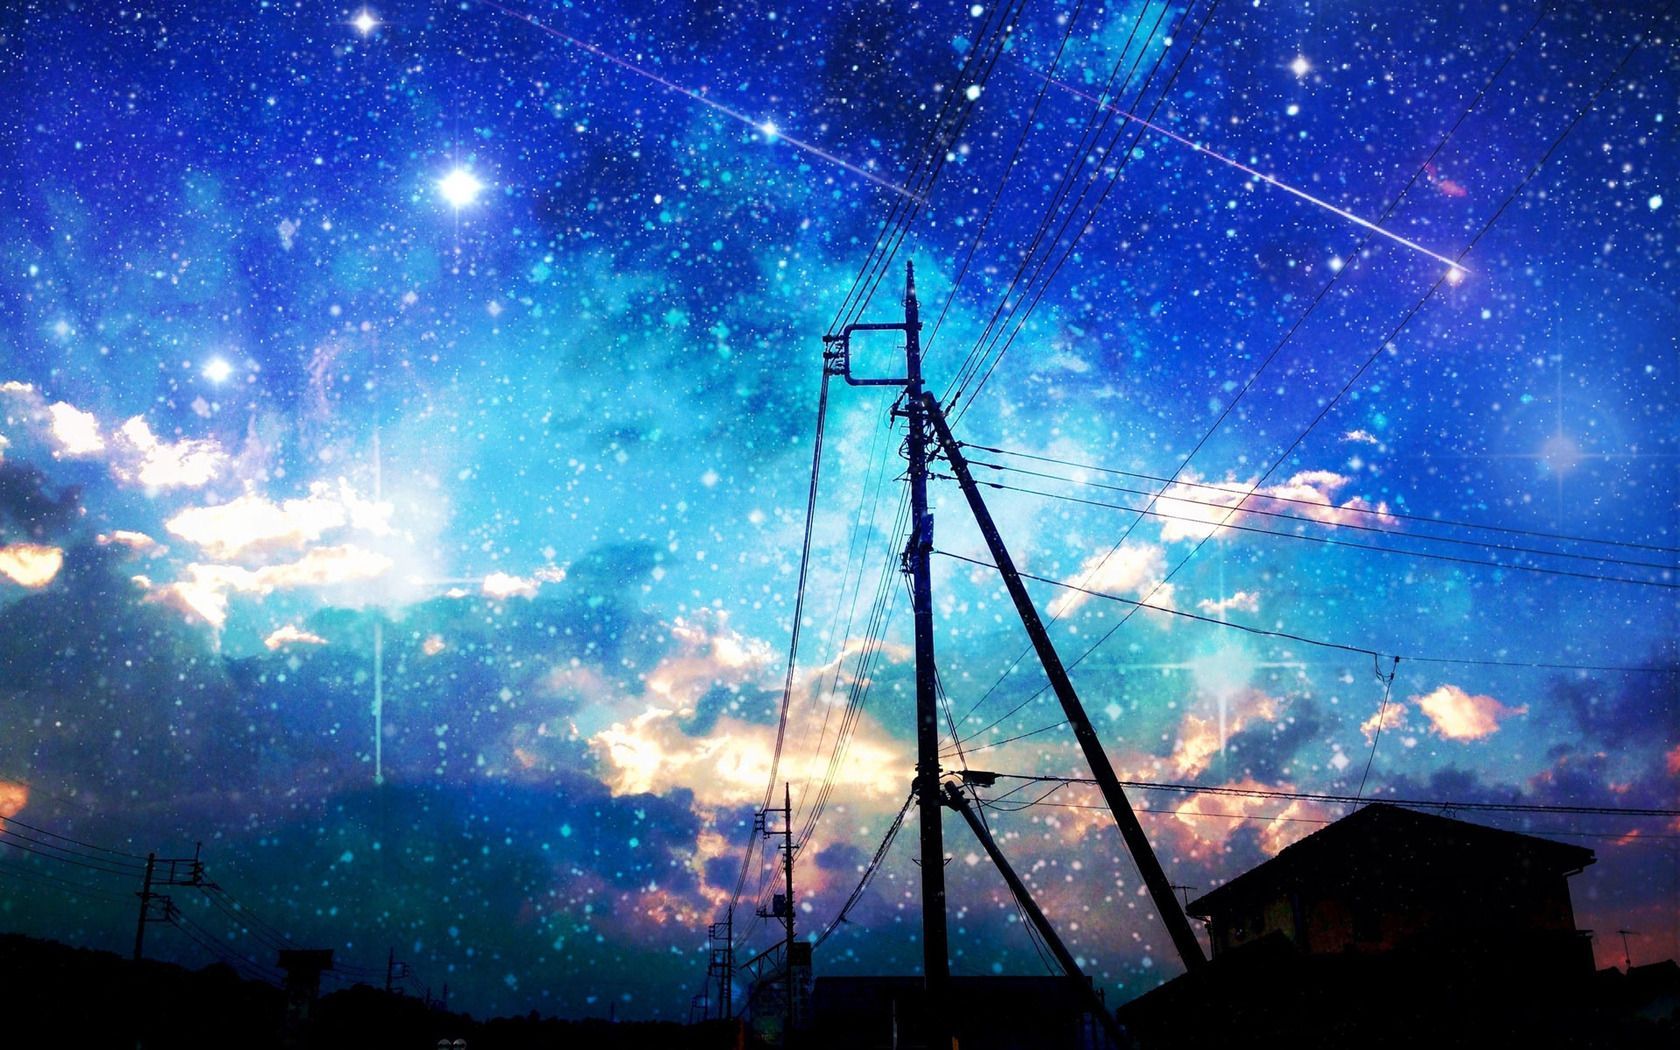 Starry sky over the city wallpaper. Anime scenery